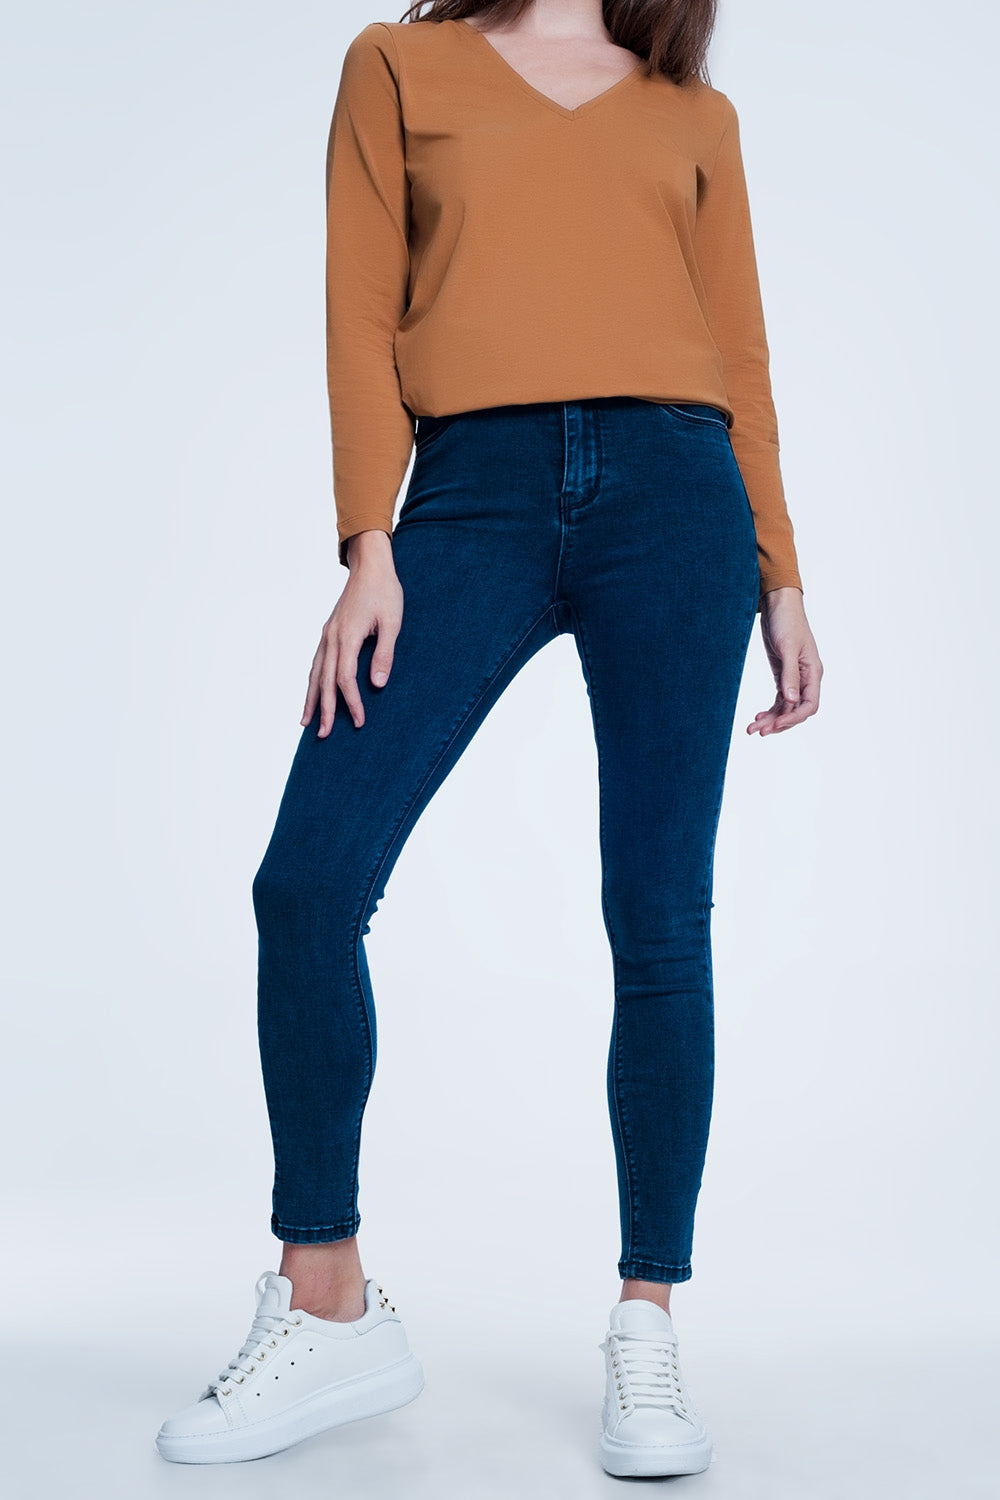 Q2 Navy blue skinny jeans with high waist